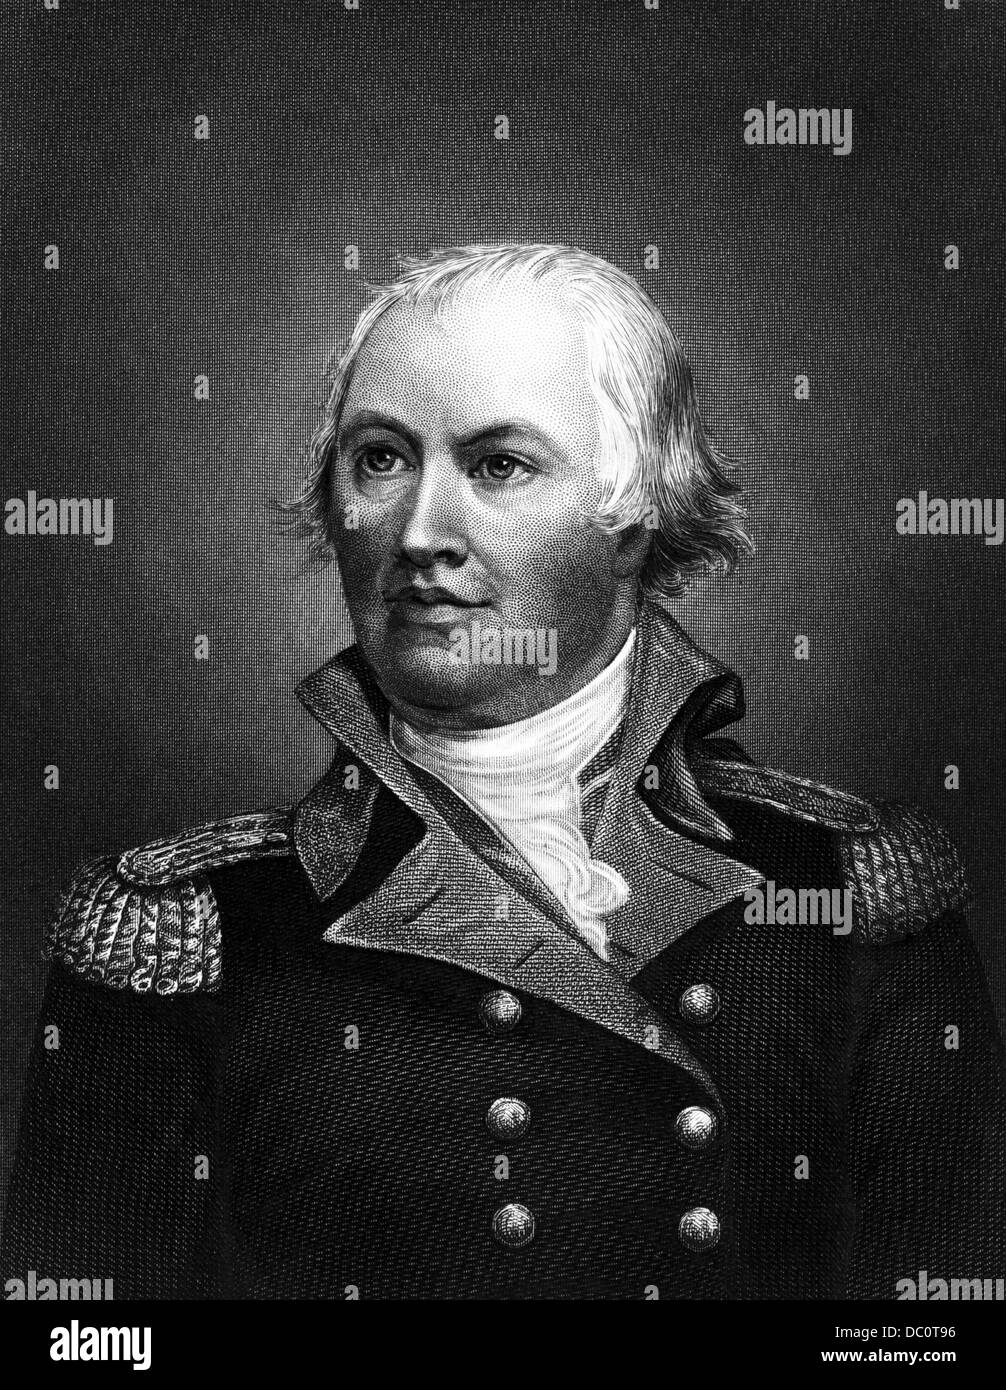 1700s PORTRAIT GENERAL NATHANIEL GREENE MAJOR GENERAL OF CONTINENTAL ARMY LATER COMMANDER AT WEST POINT Stock Photo